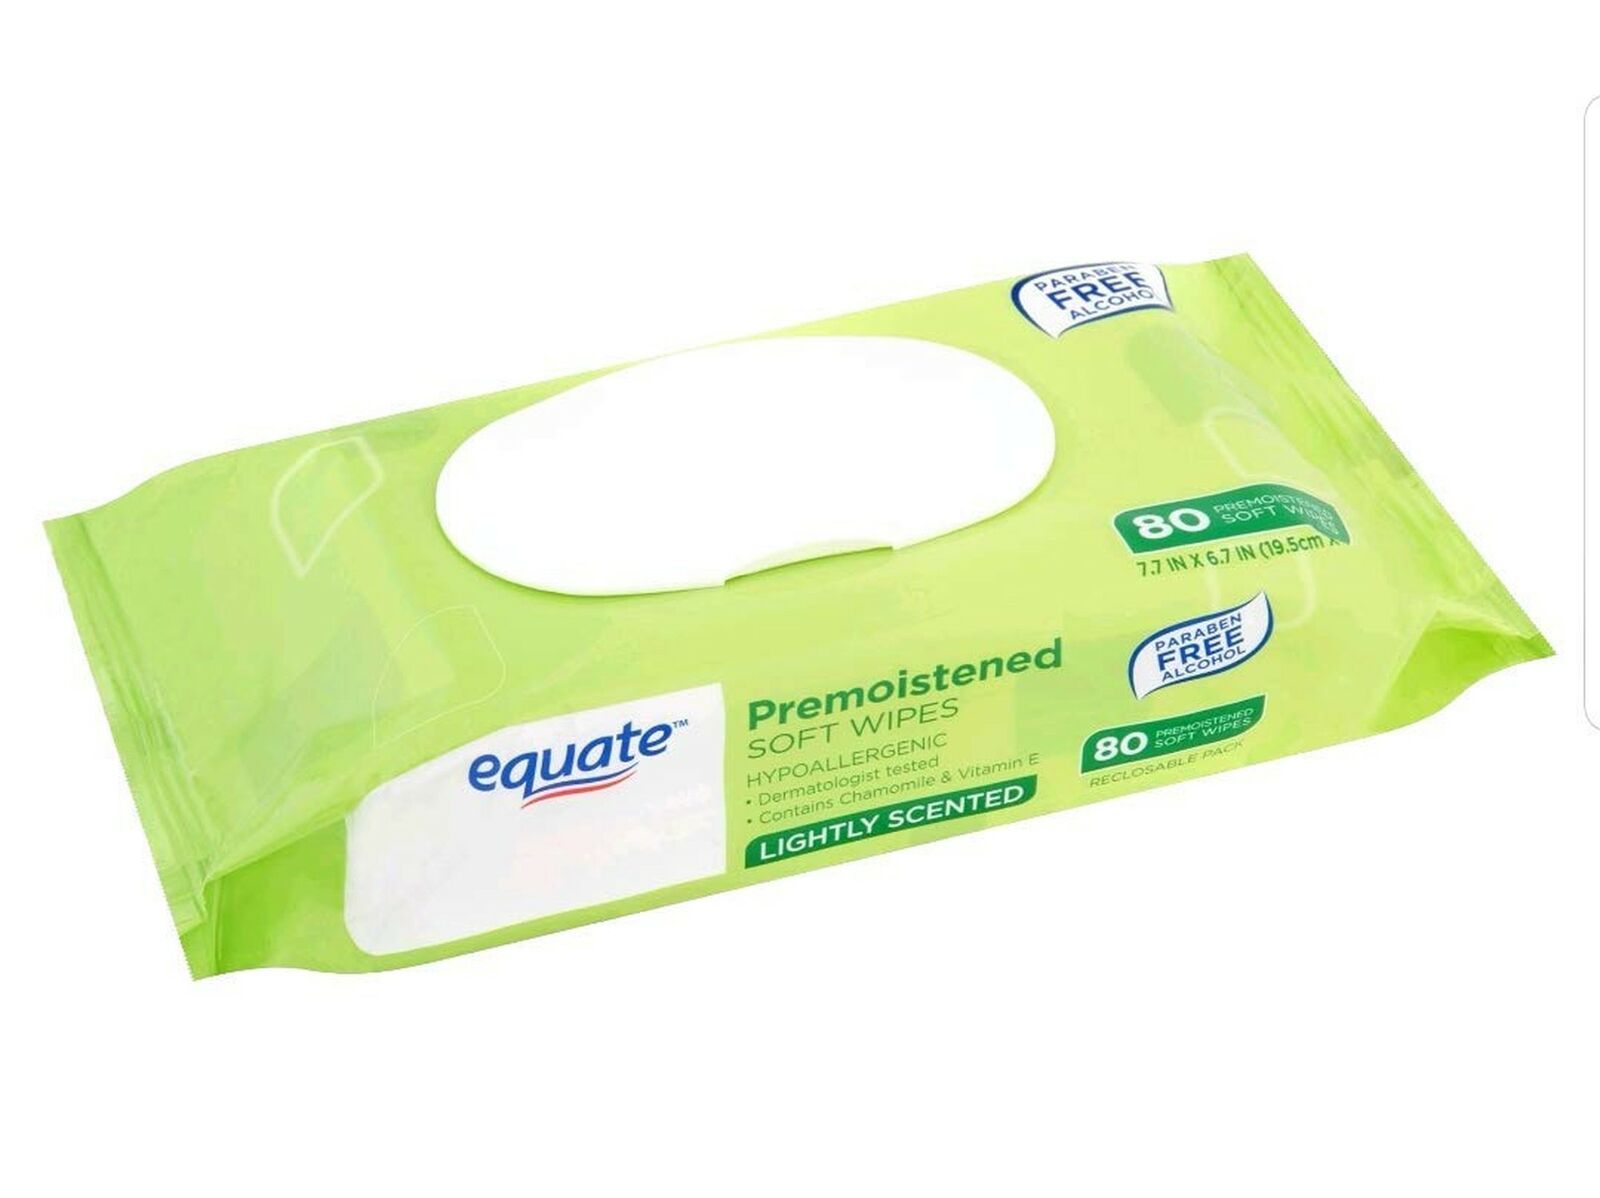 Equate Hypoallergenic Lightly Scented Premoistened Soft Wipes 80 Wipes